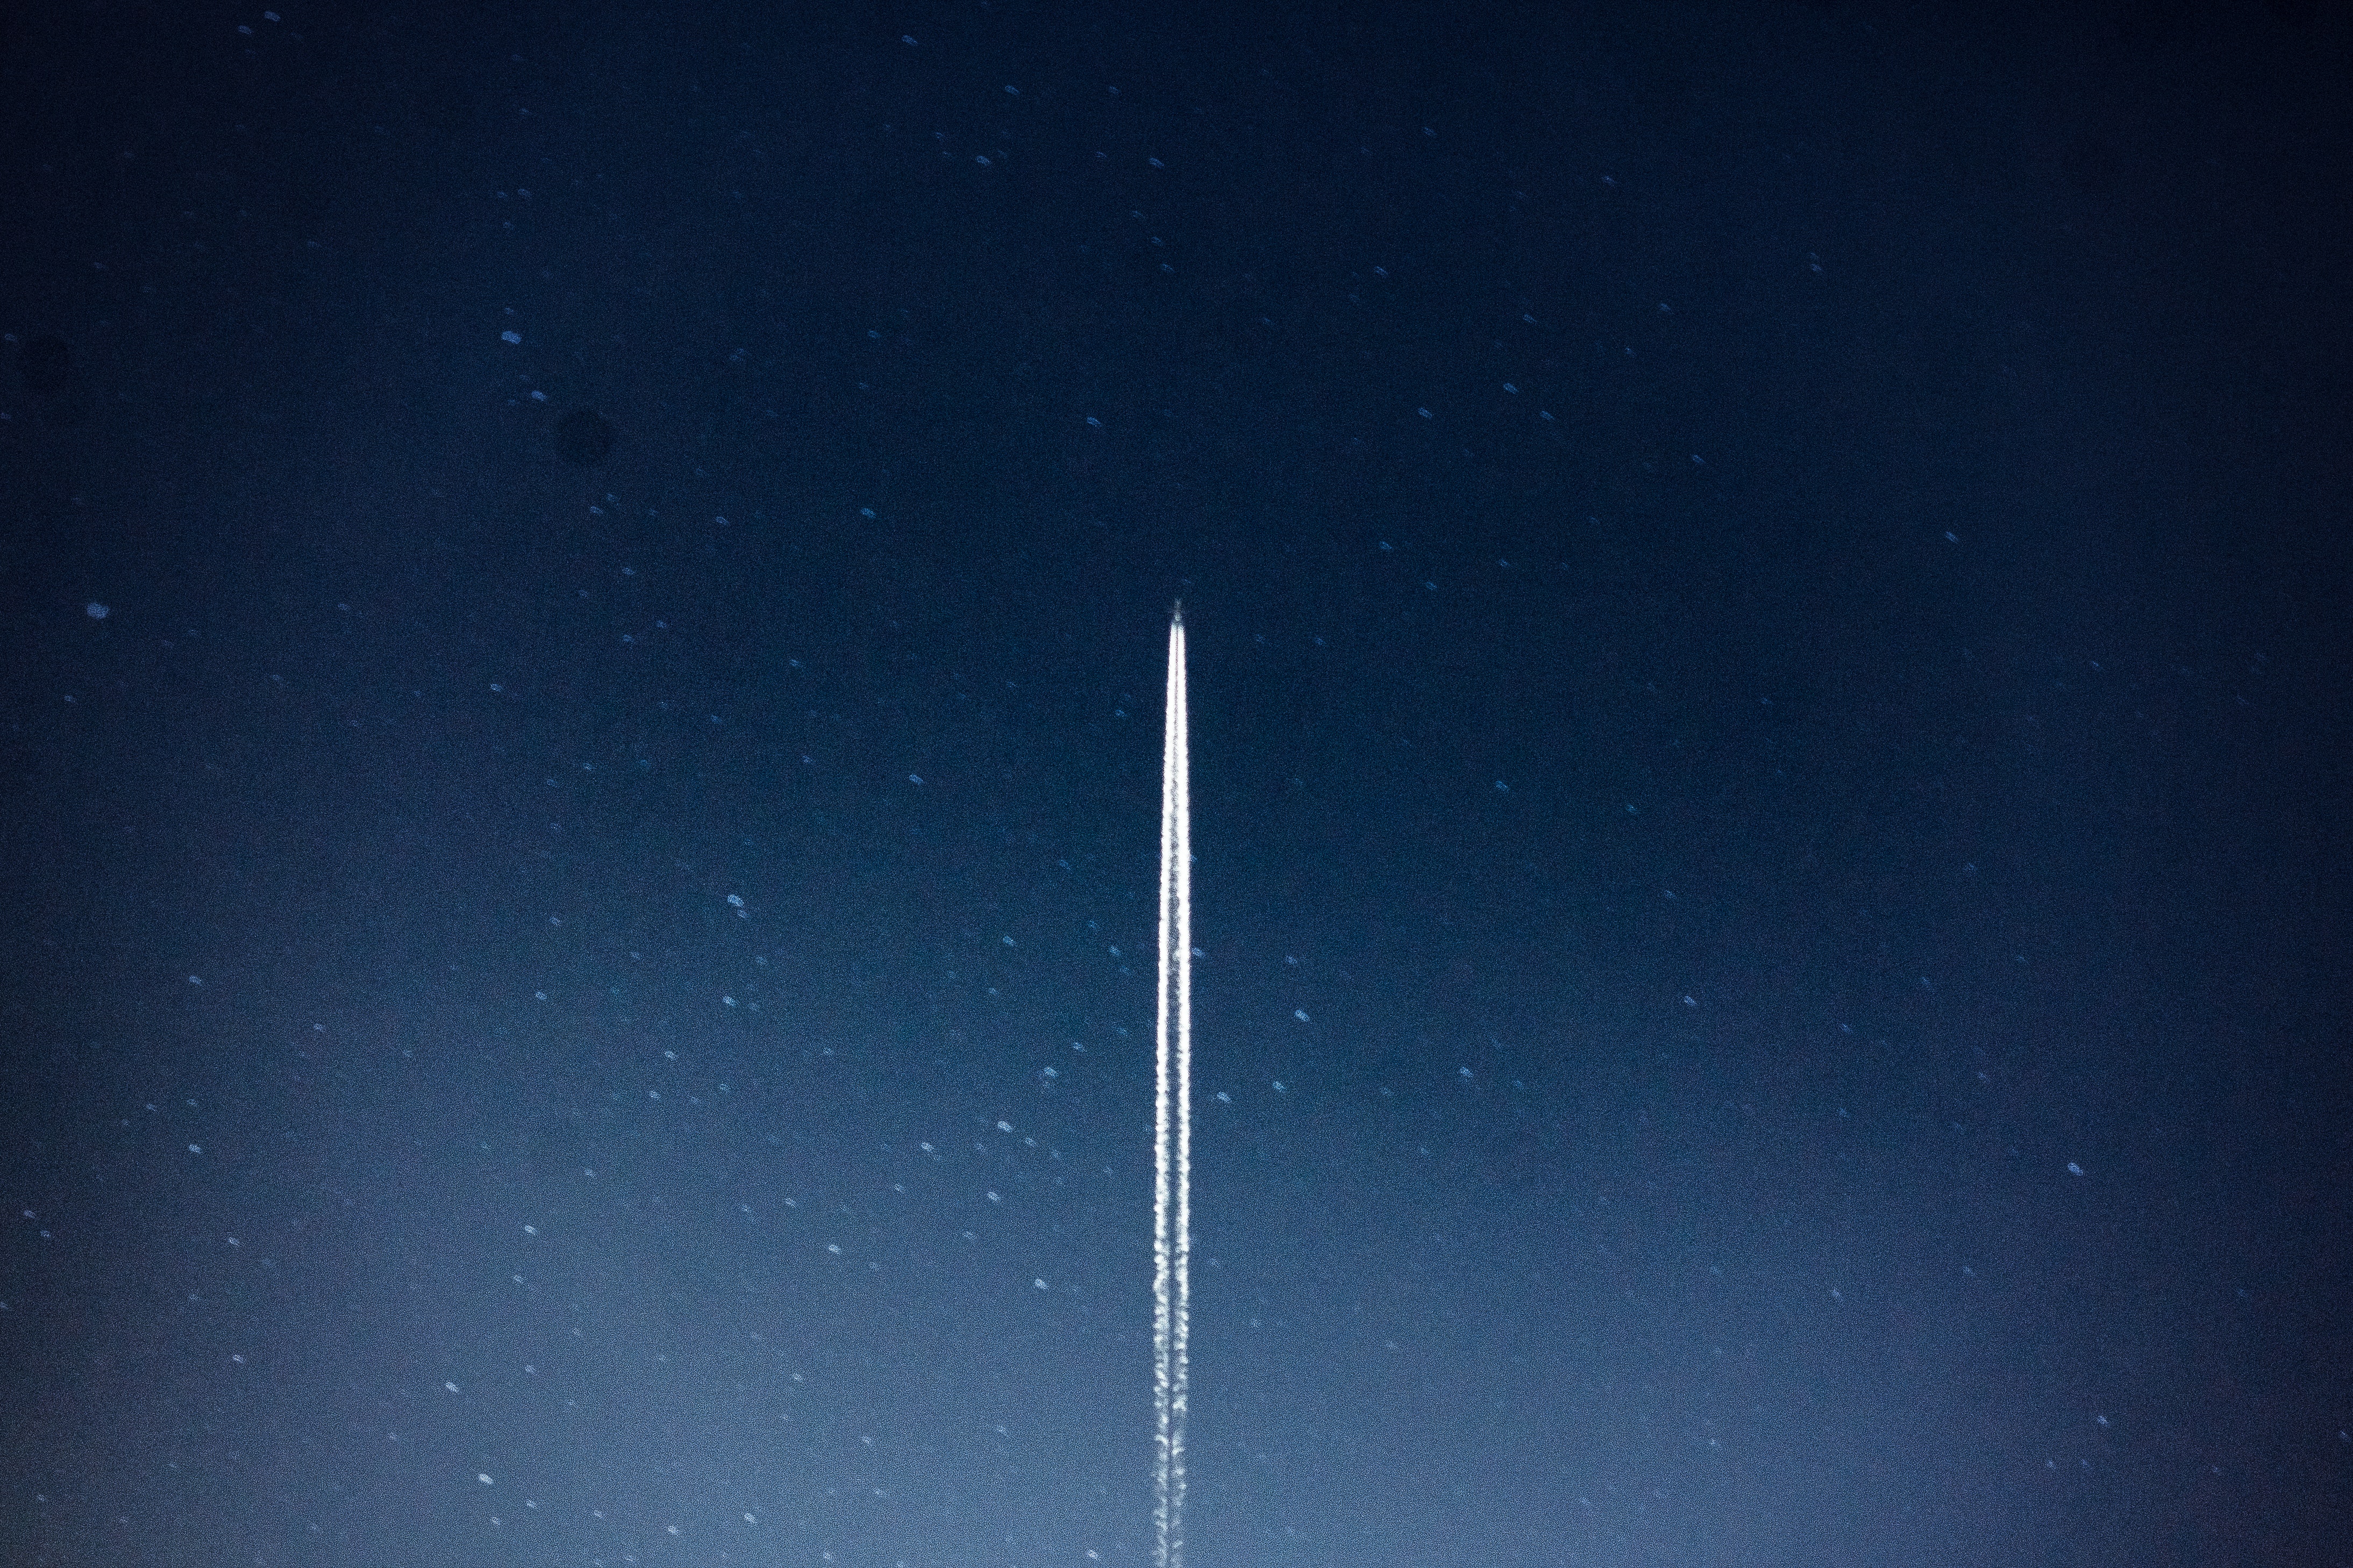 A Rocket heading into space at night